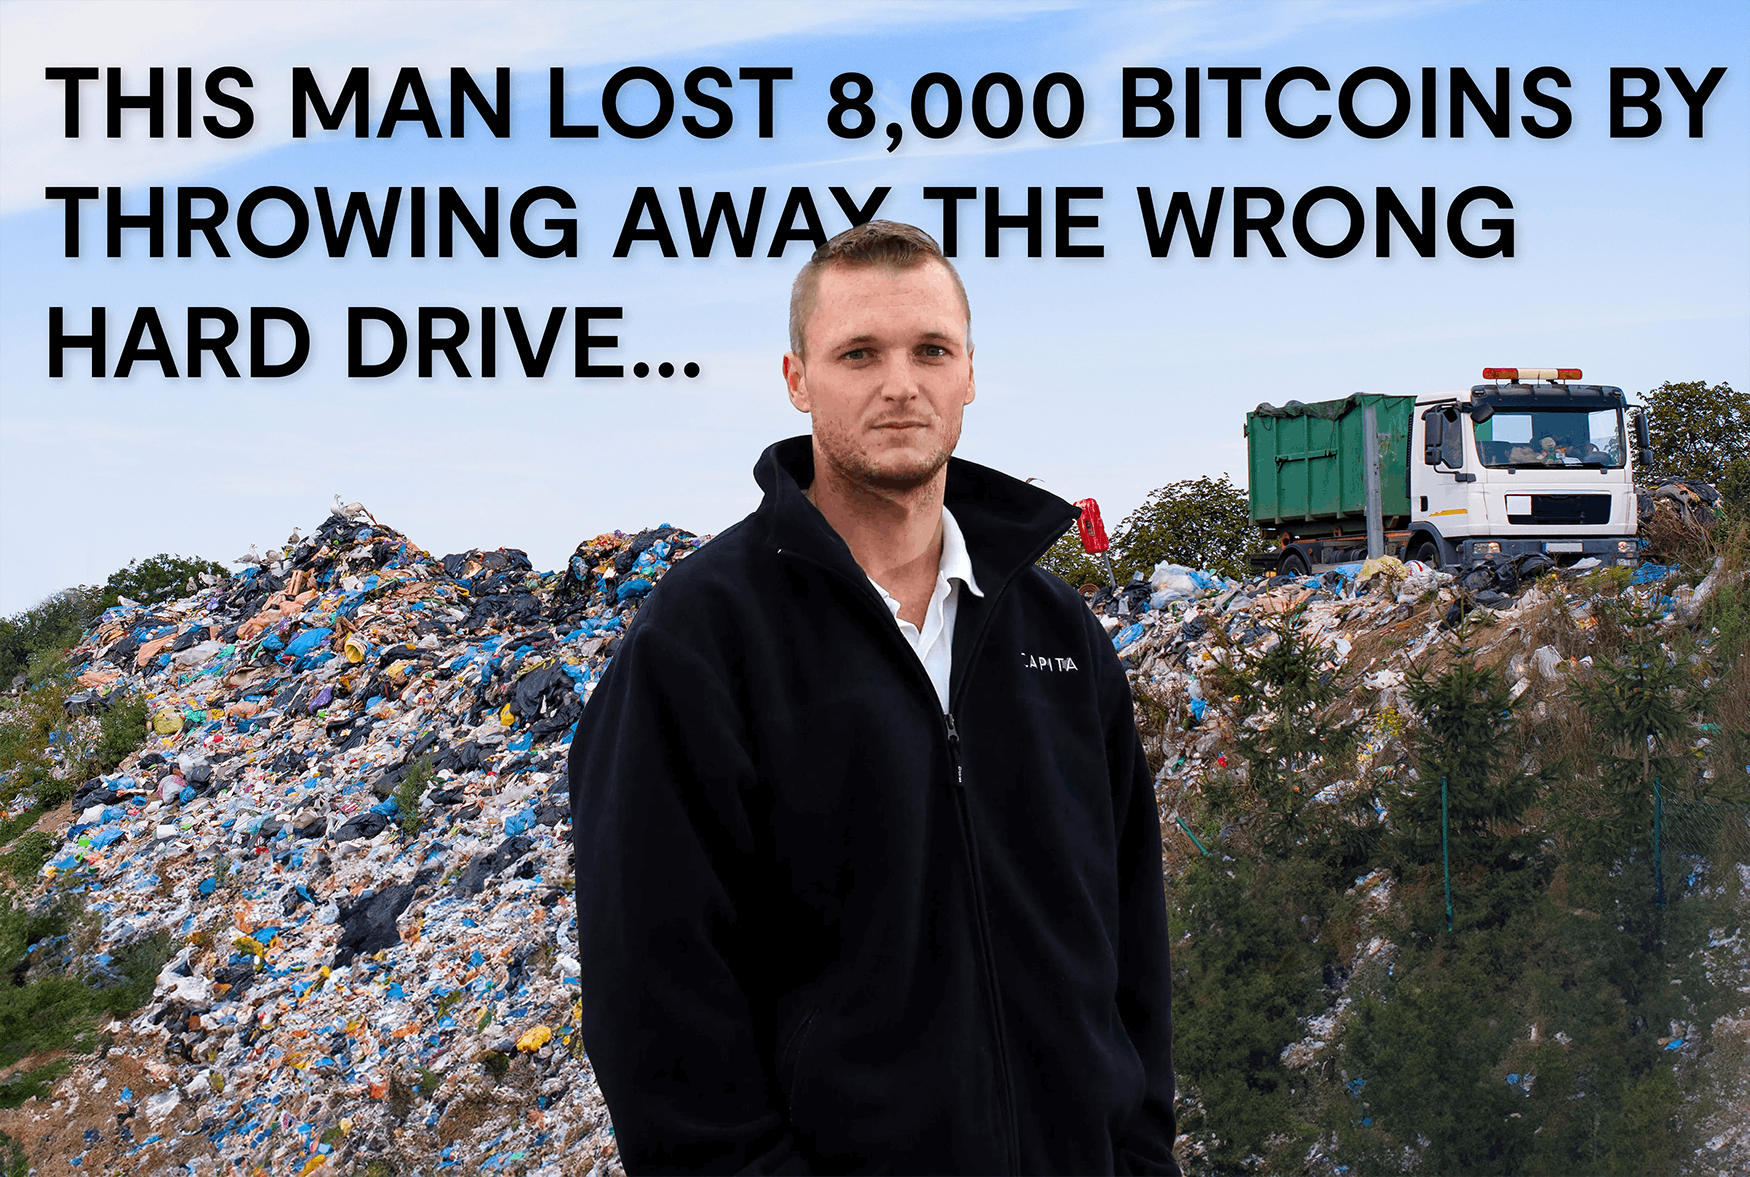 Man lost 8,000 bitcoins and is still looking for them